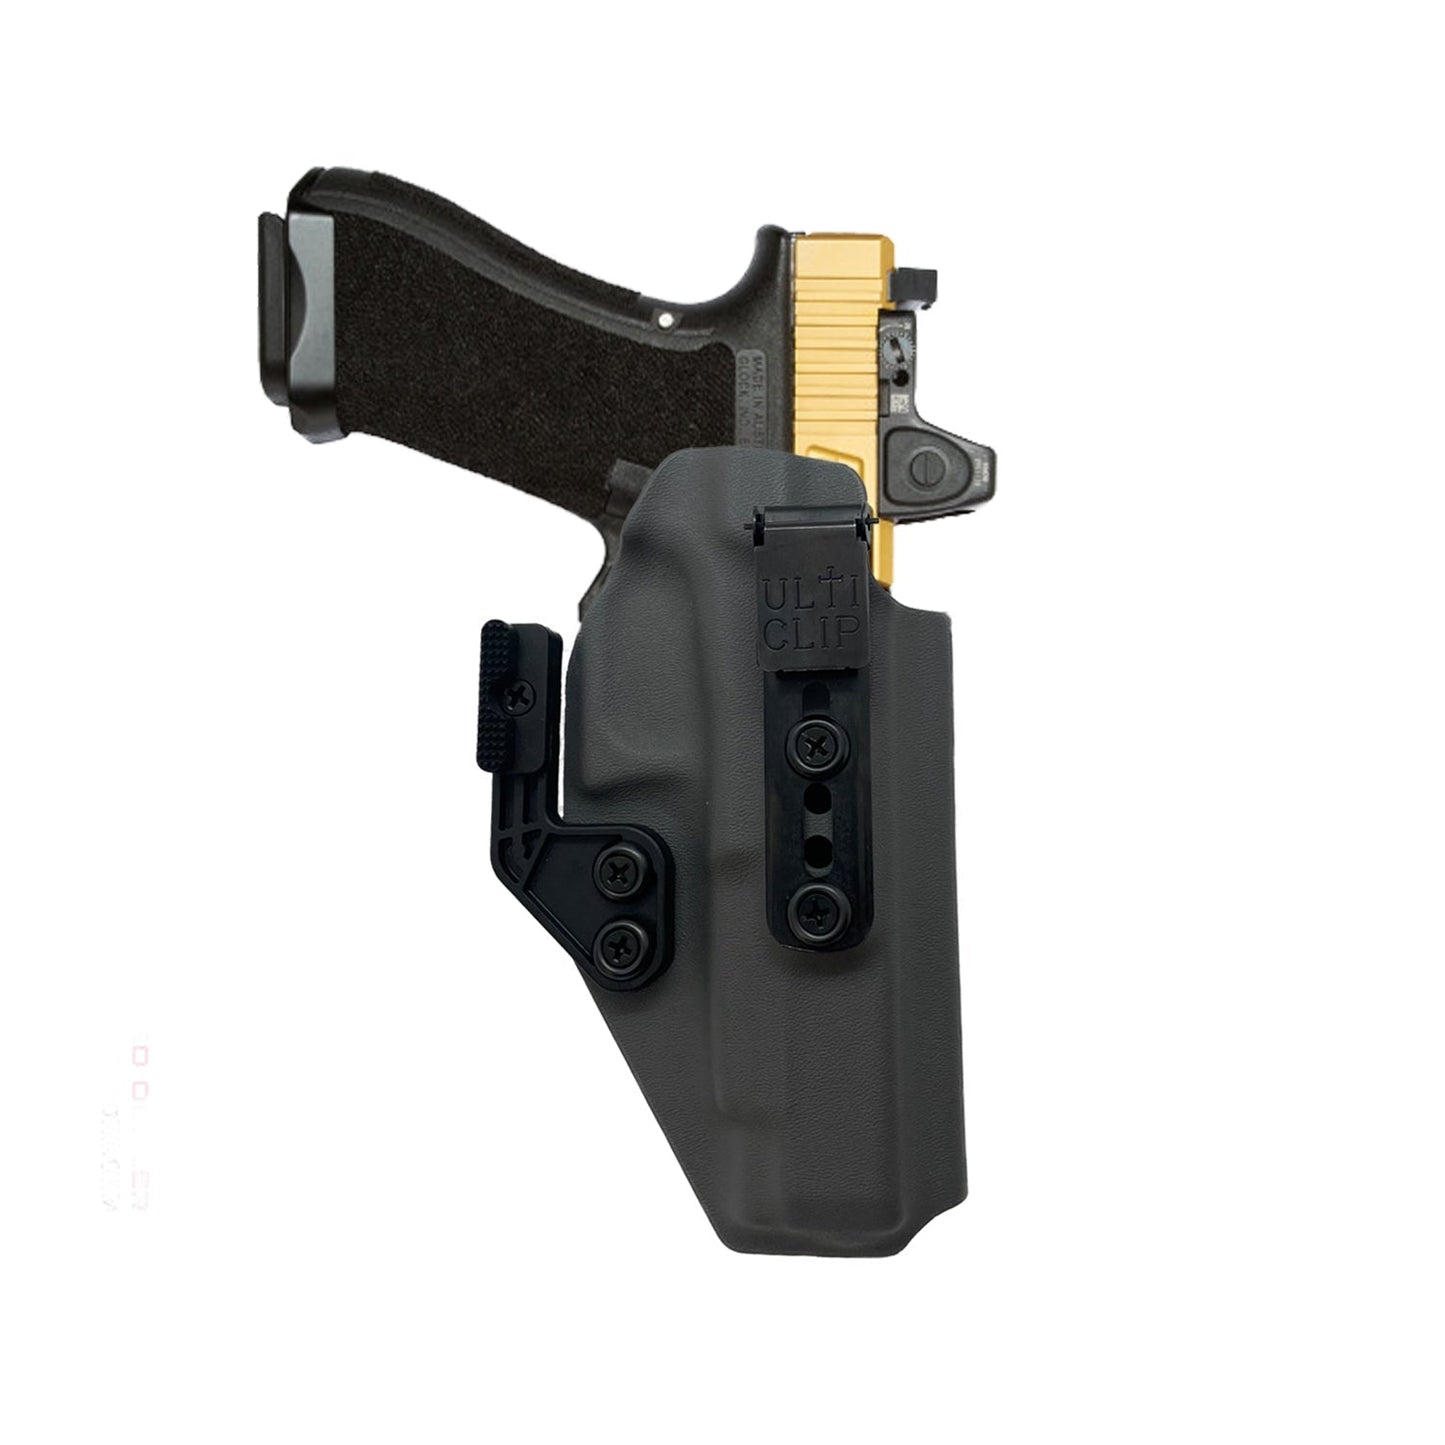 SIG P365/ P365X WIth TLR6 Light (ULTI-CLIP 3) IWB (Inside The Waistband Holster)